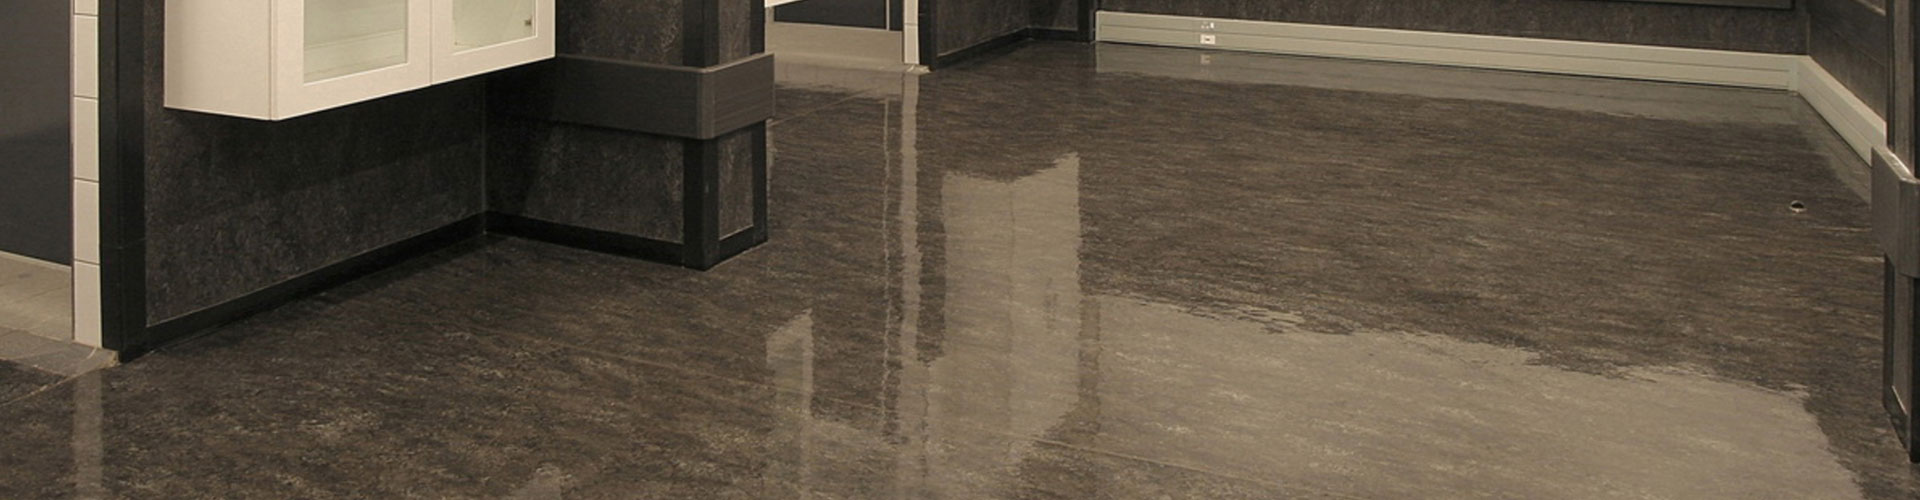 We carry a wide selection of linoleum patterns and styles